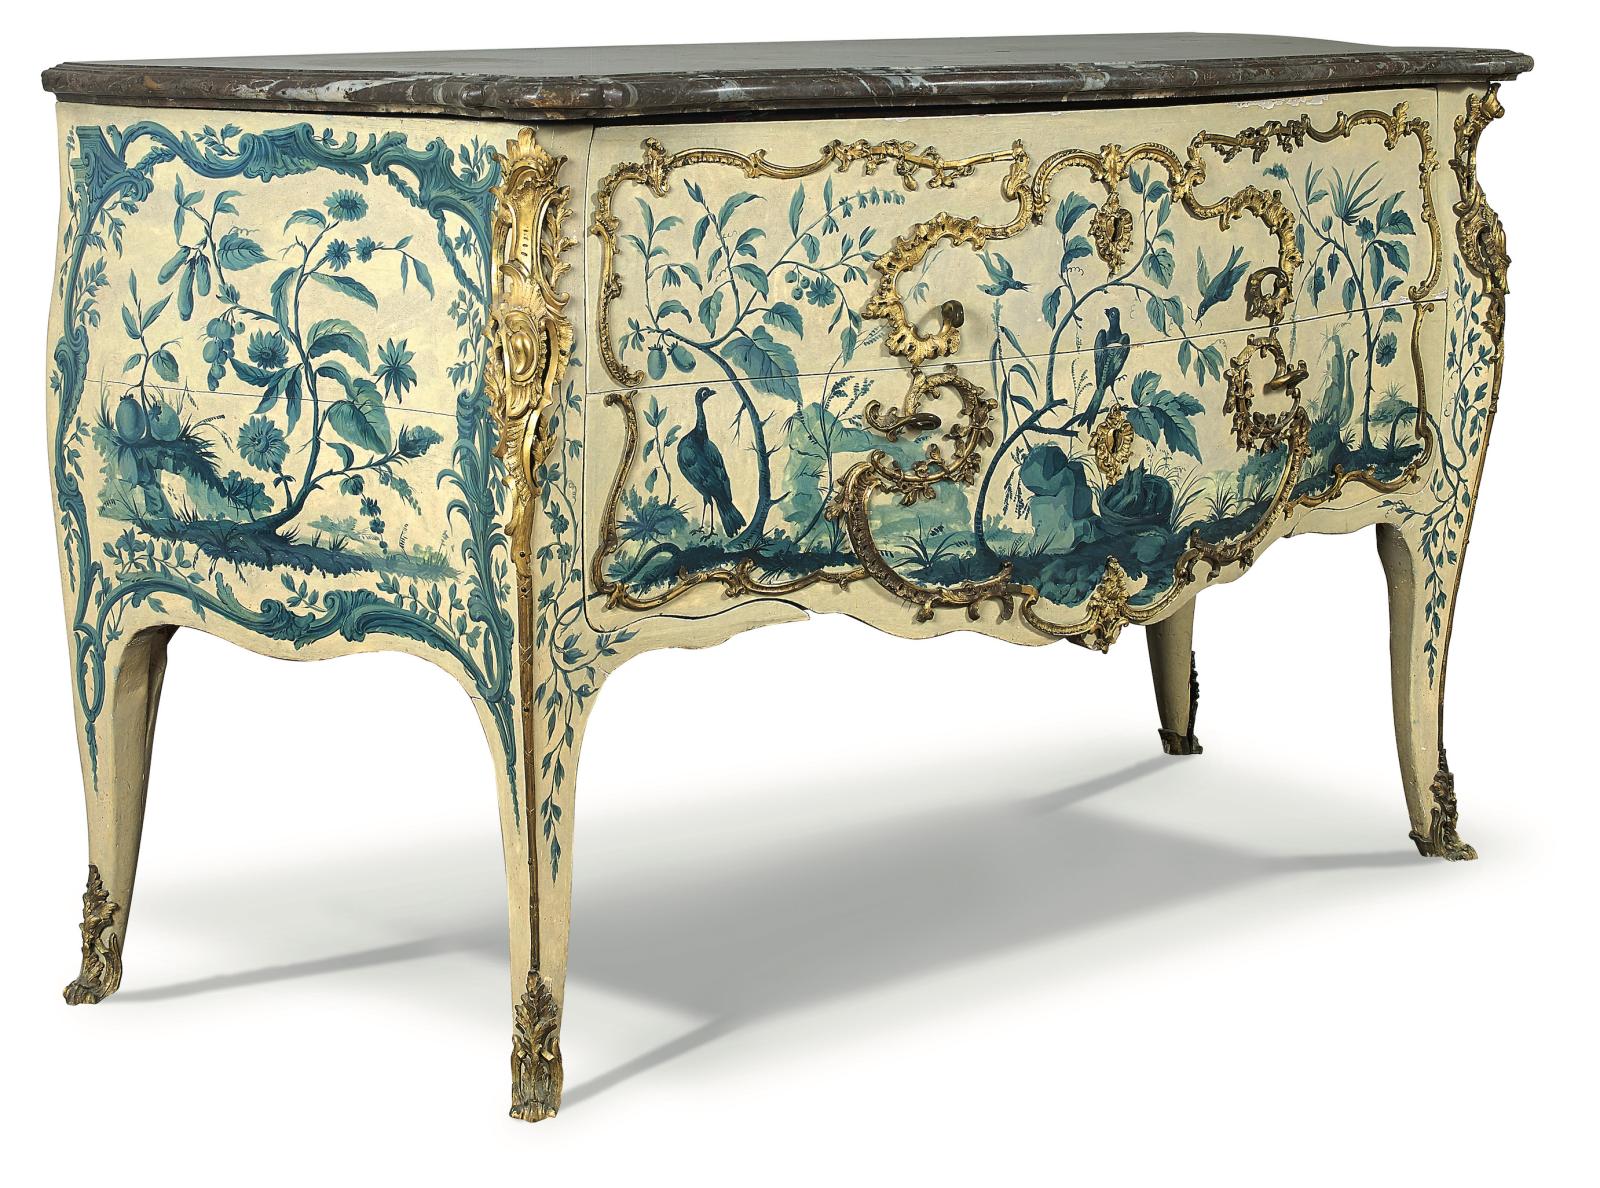 A Perfect Pair and 18th-century French Craftsmanship